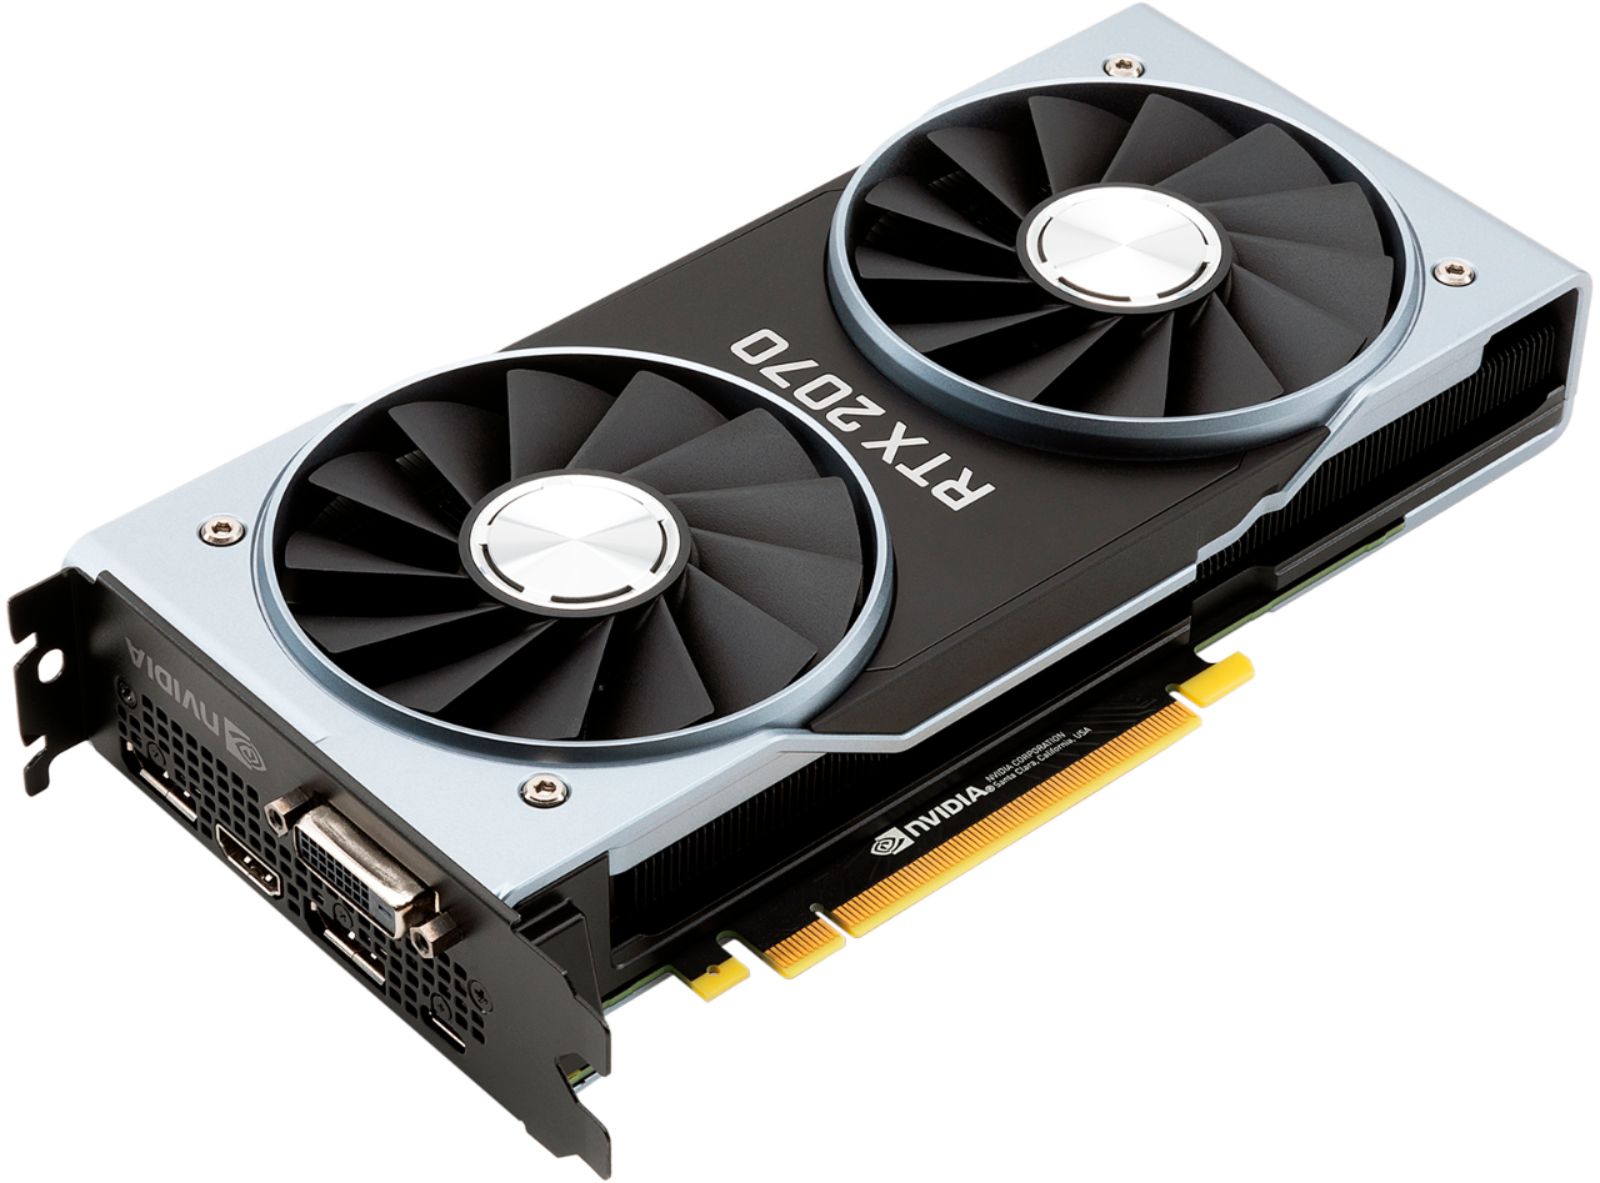 Buy: GeForce RTX 2070 Founders Edition 8GB GDDR6 PCI Express 3.1 Graphics Card 9001G1602550000